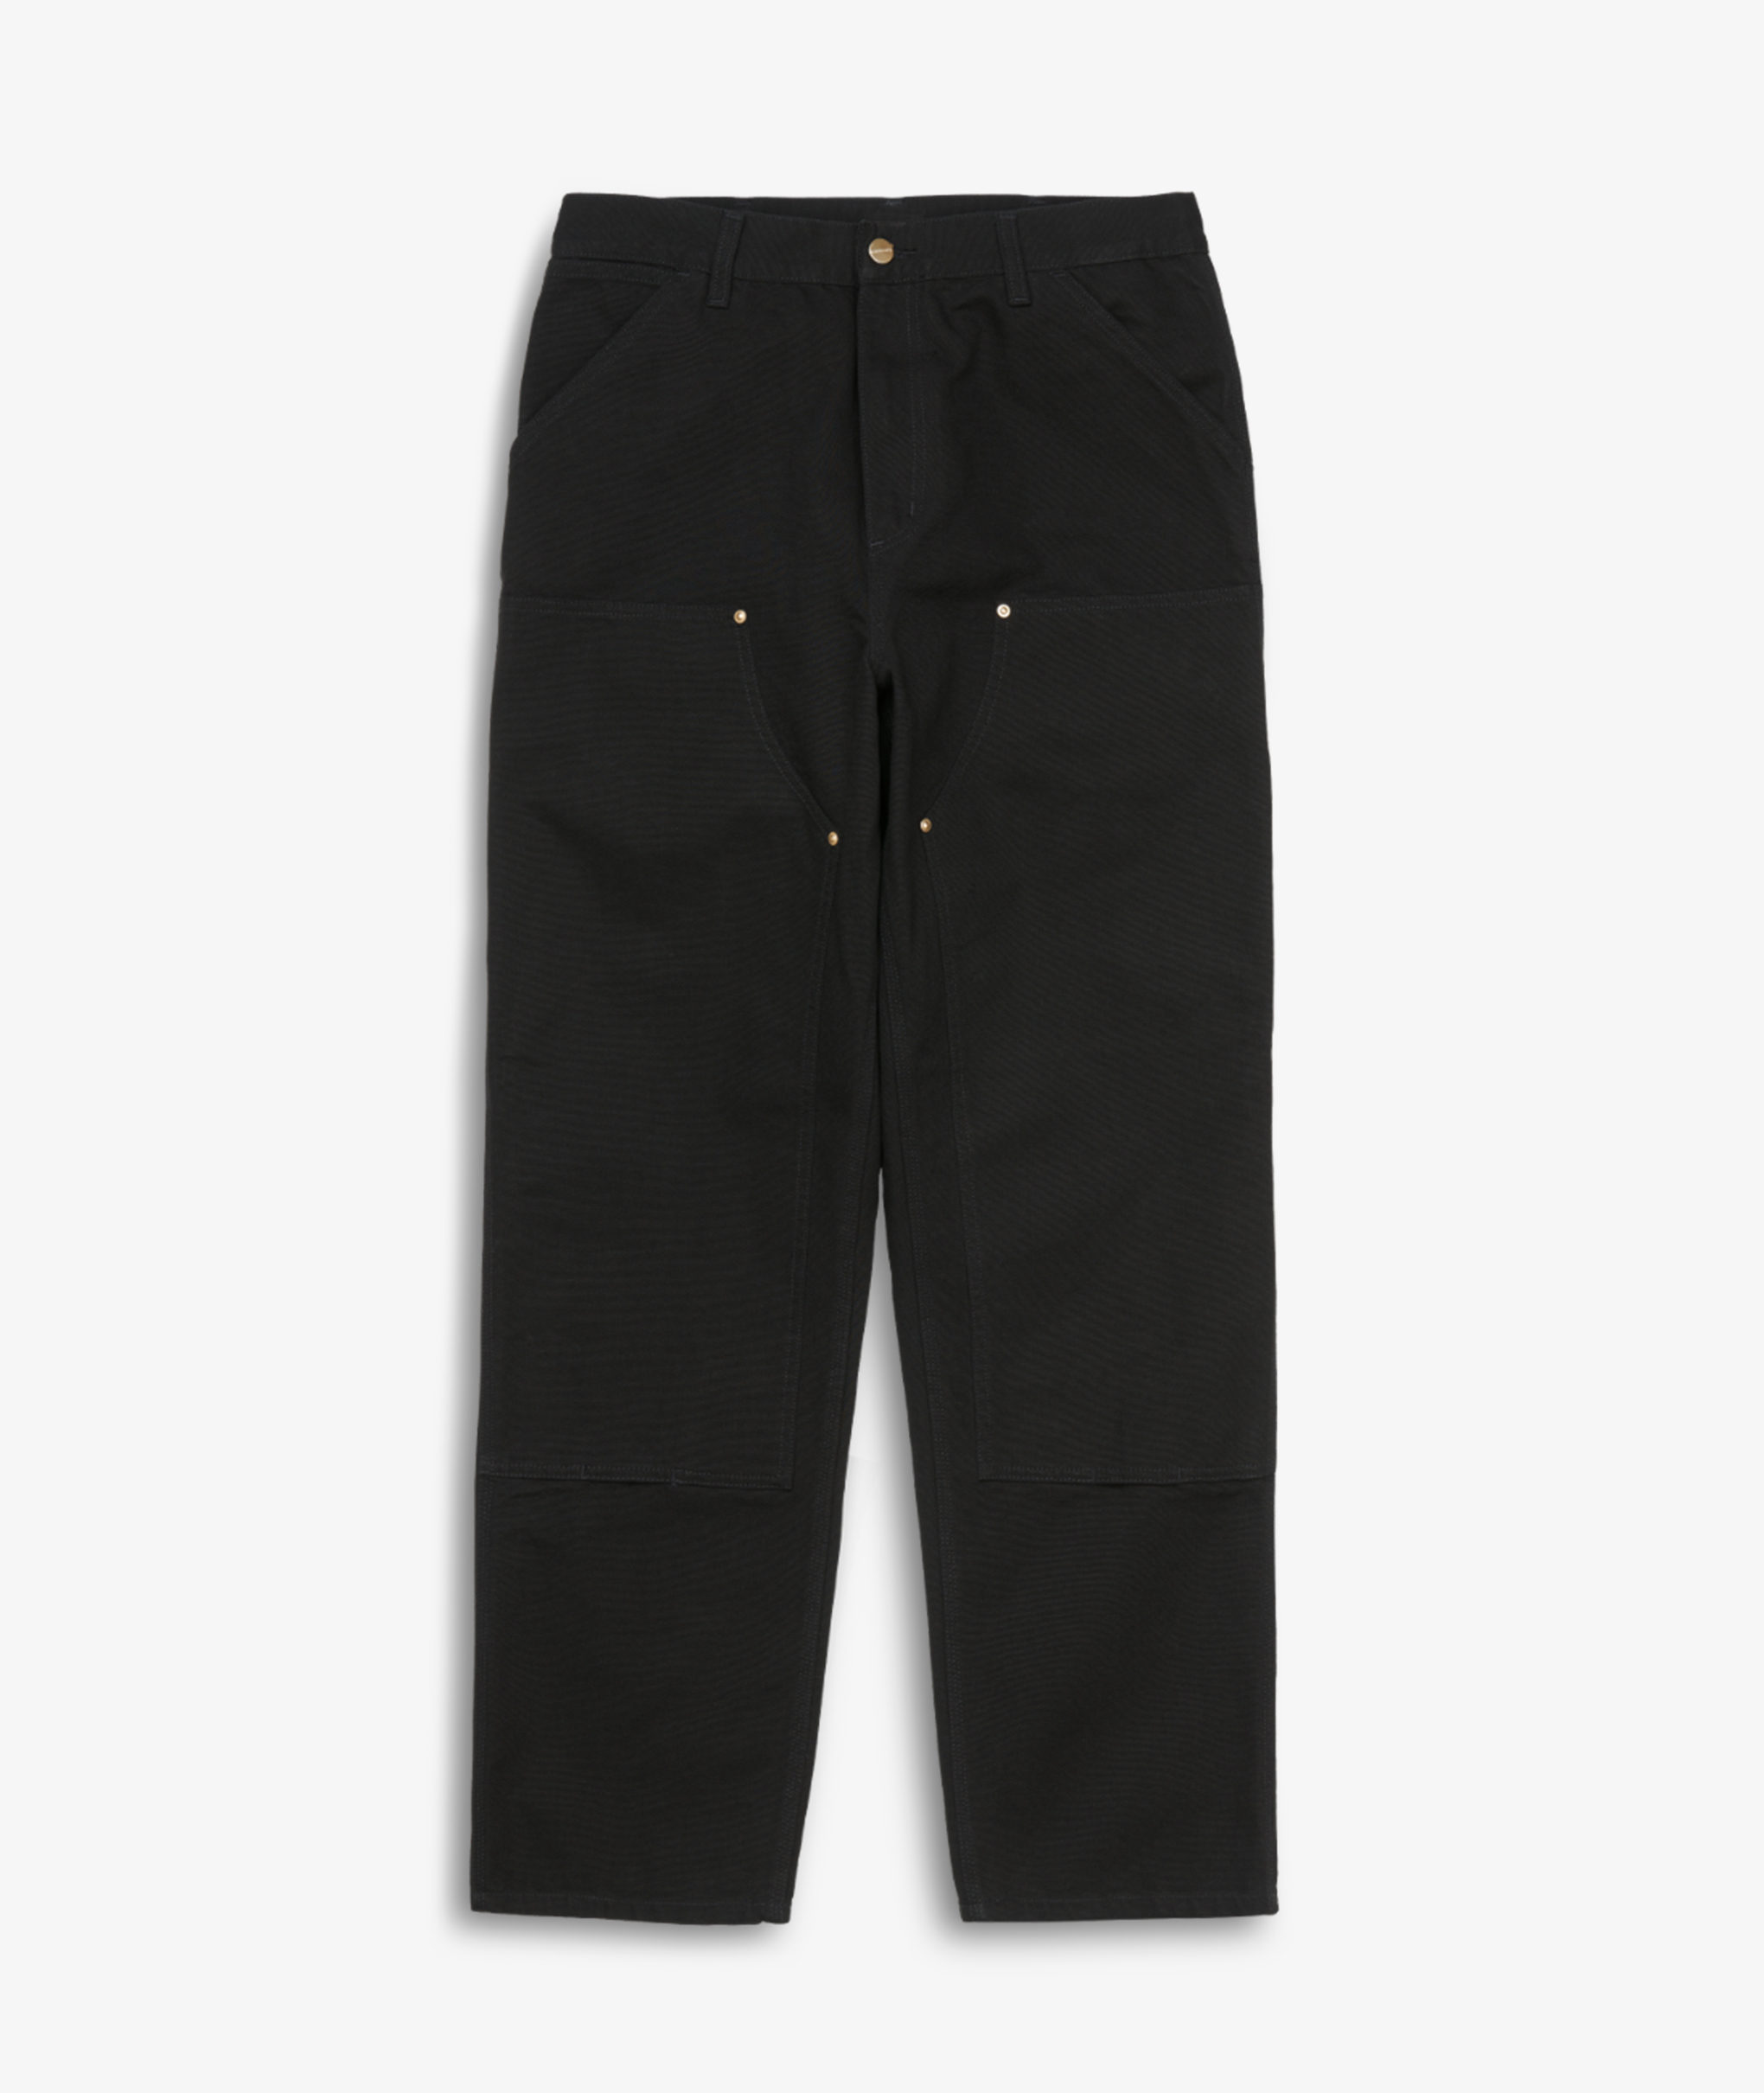 Double Knee Pants by Carhartt Online | THE ICONIC | Australia